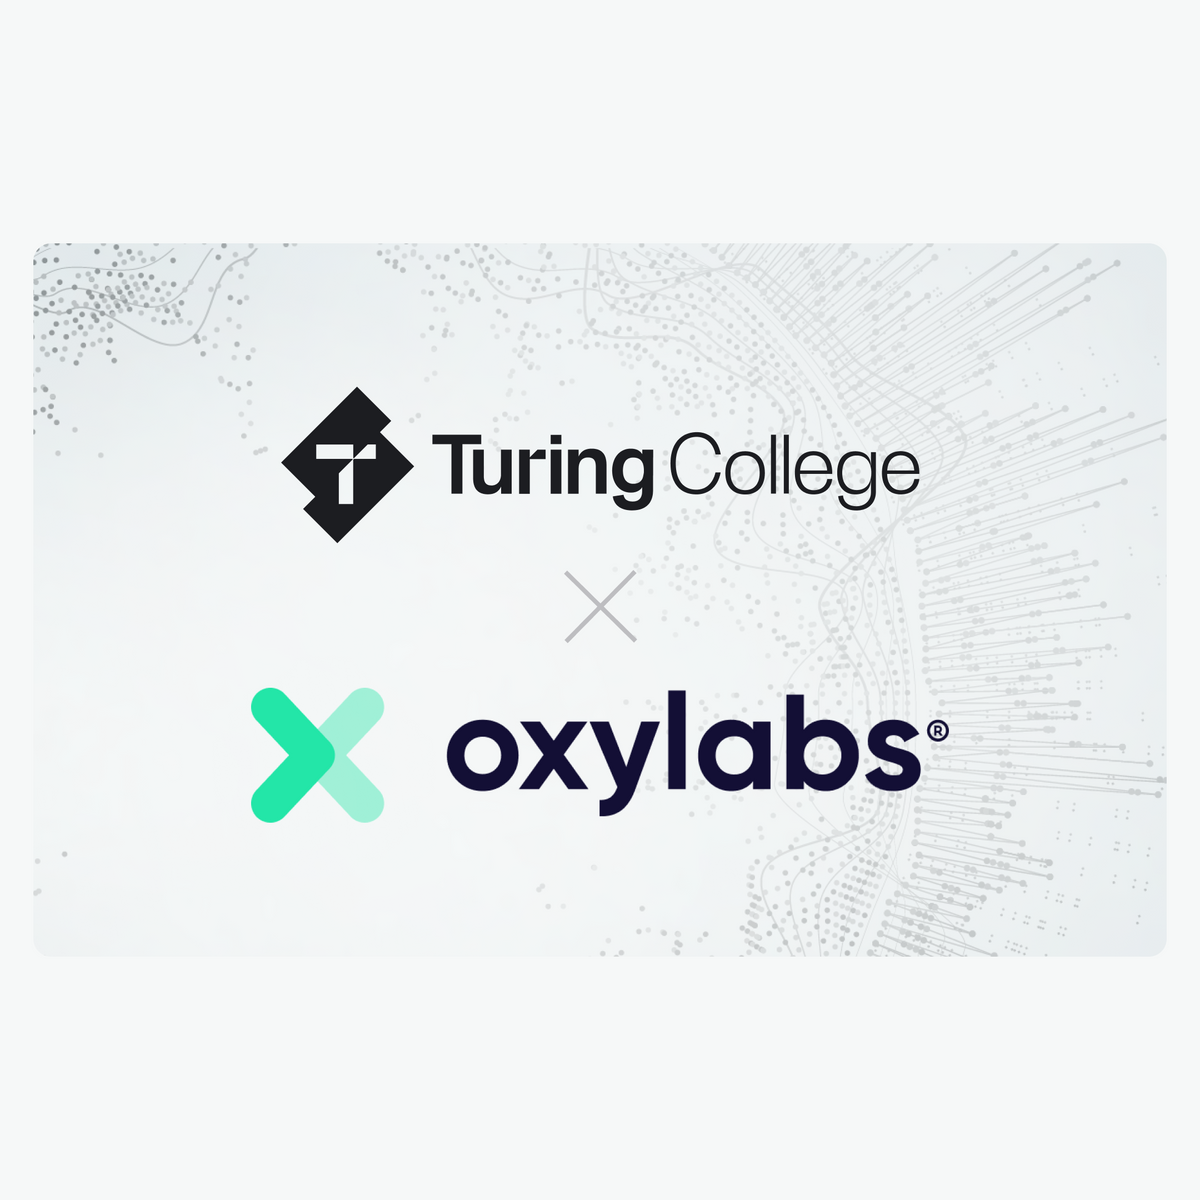 Oxylabs partners with Turing College to prepare data engineers